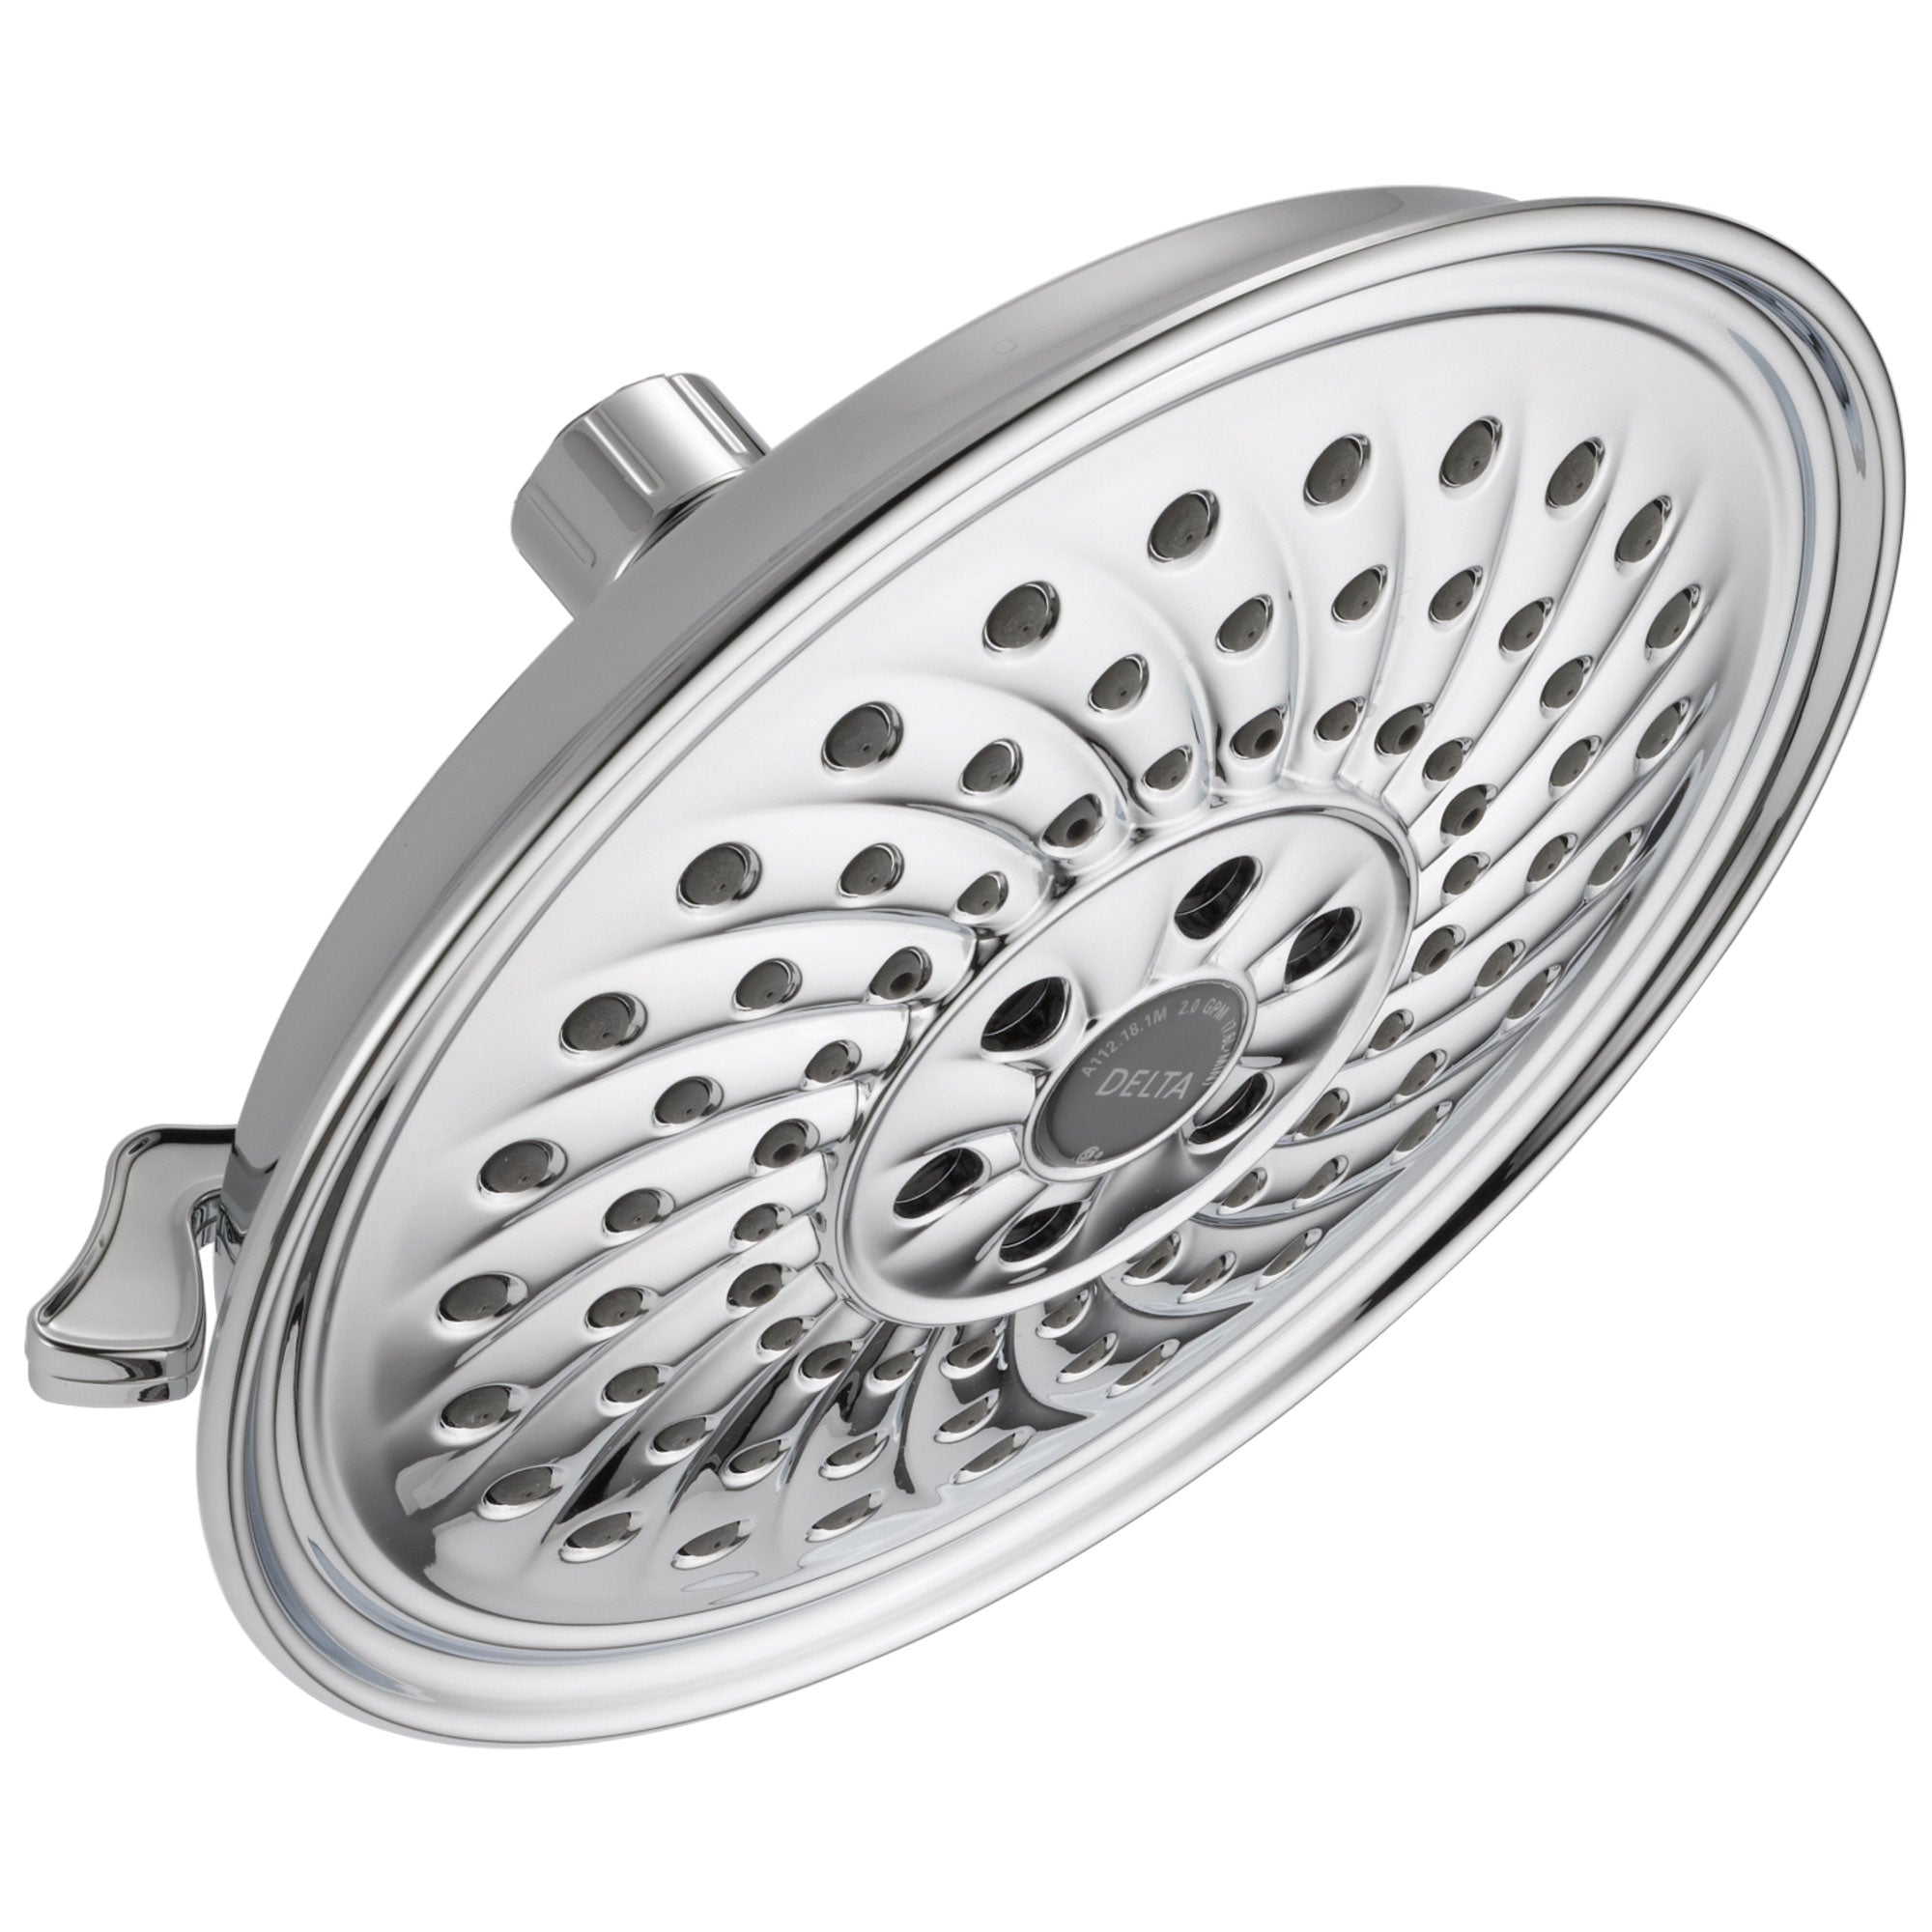 Delta Universal Showering Components Collection Chrome Finish H2Okinetic Watersense 3-Setting Raincan Shower Head D52687